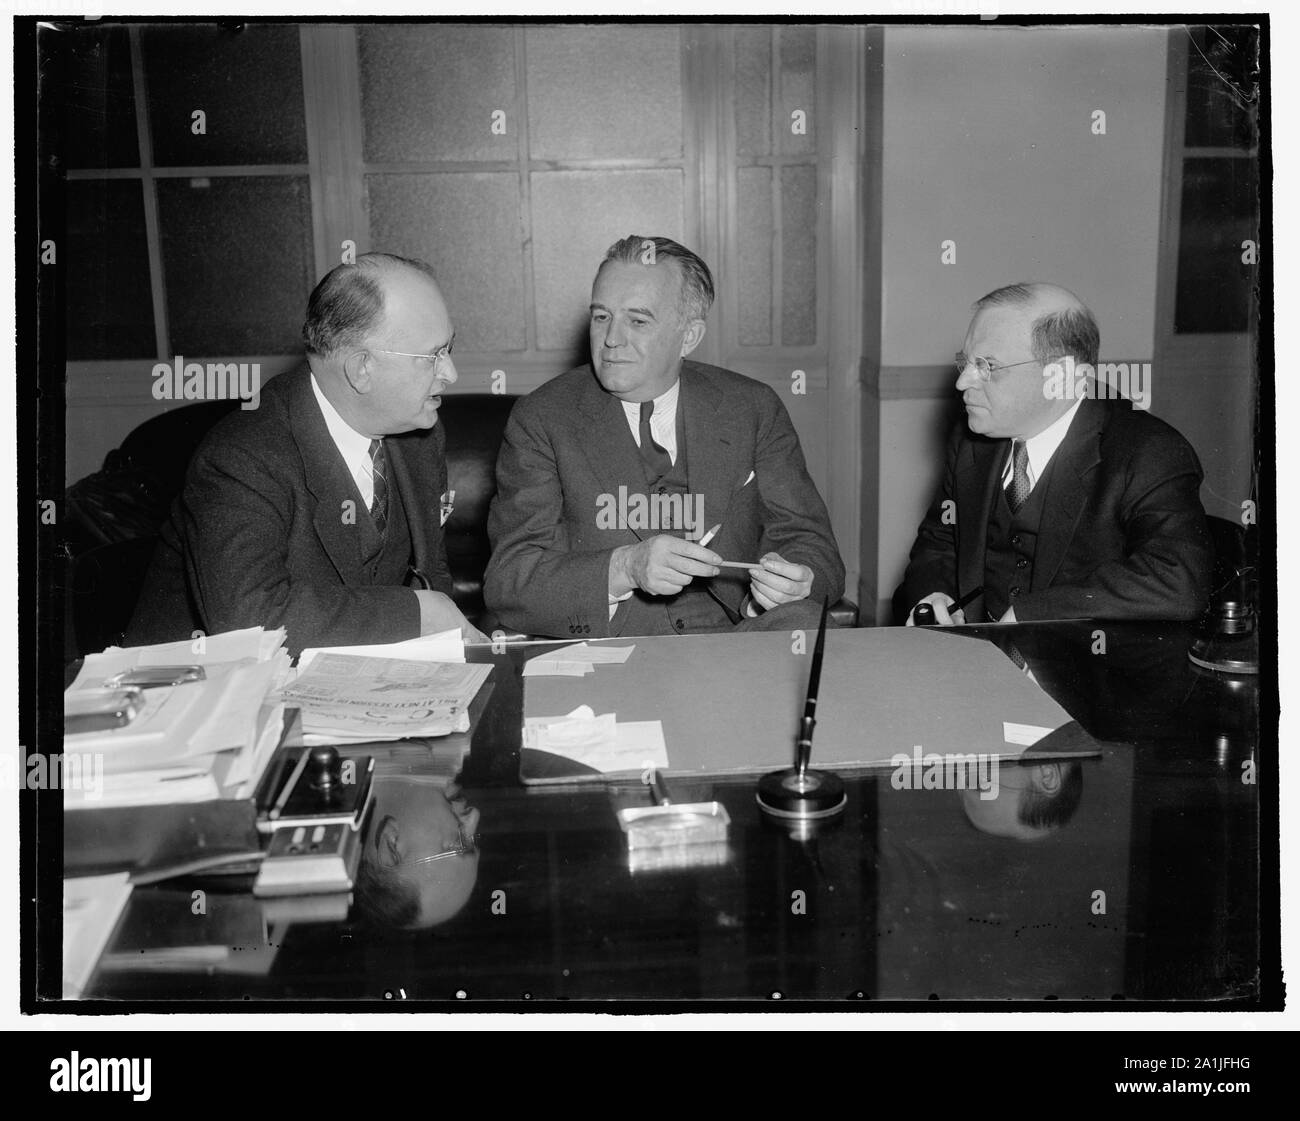 National Mediation Board. Washington, D.C., Jan. 10. A new photograph of the National Mediation Board whose members are responsible for administrating the Railway Labor Act left to right they are: George A. Cook, Secretary; O.S. Beyer; and William M. Leiserson, member, 1/10/38 Stock Photo